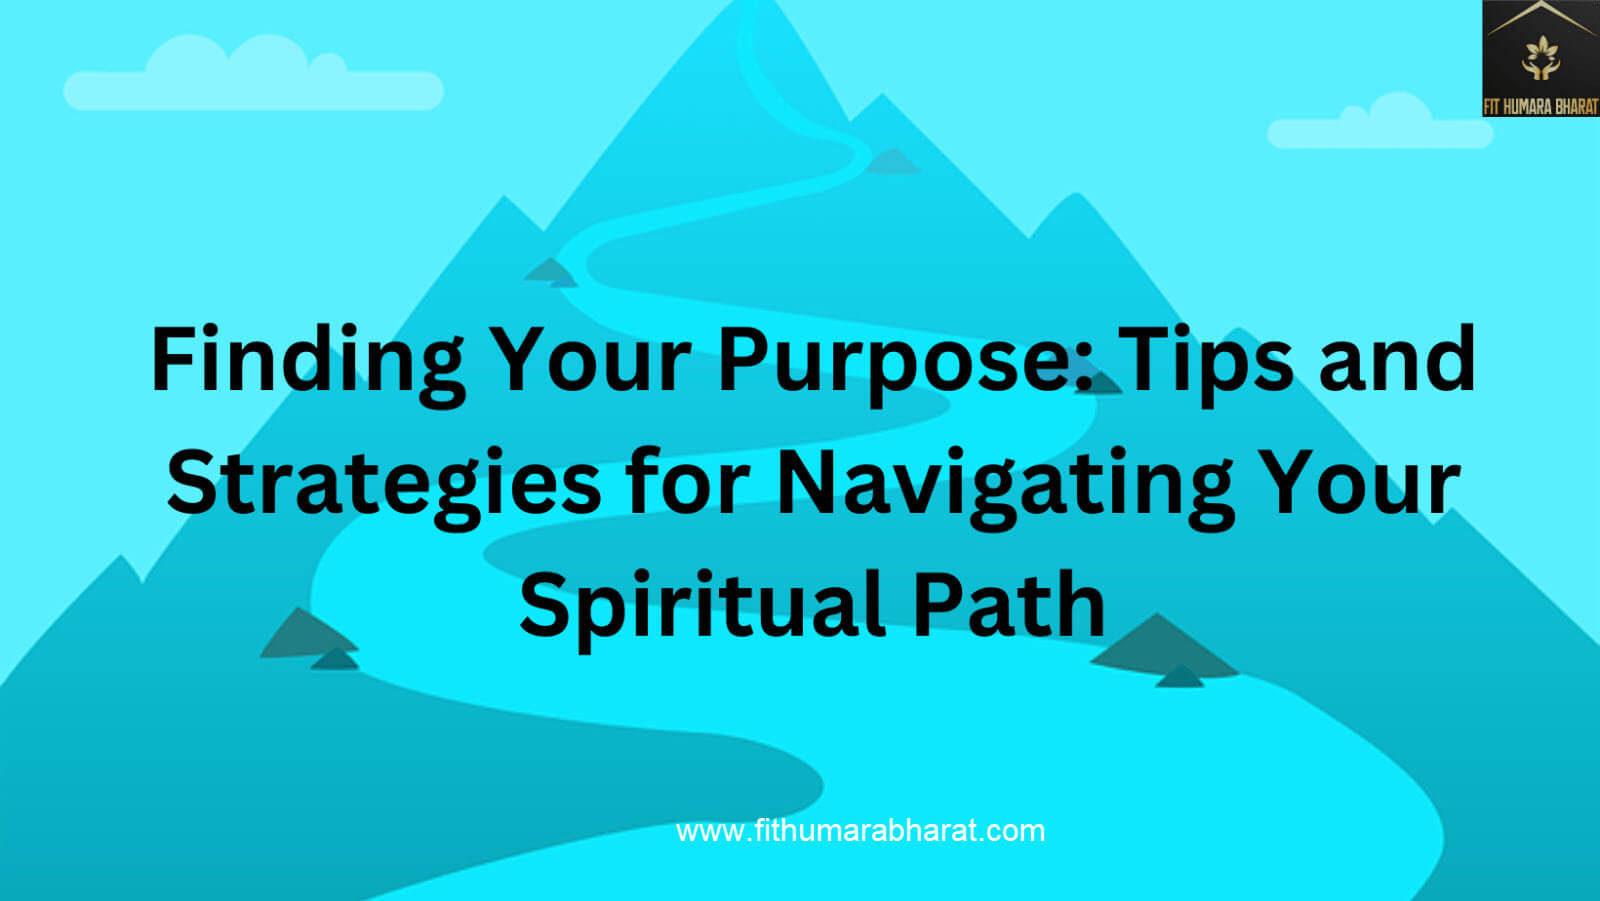 Finding Your Purpose: Tips and Strategies for Navigating Your Spiritual Path